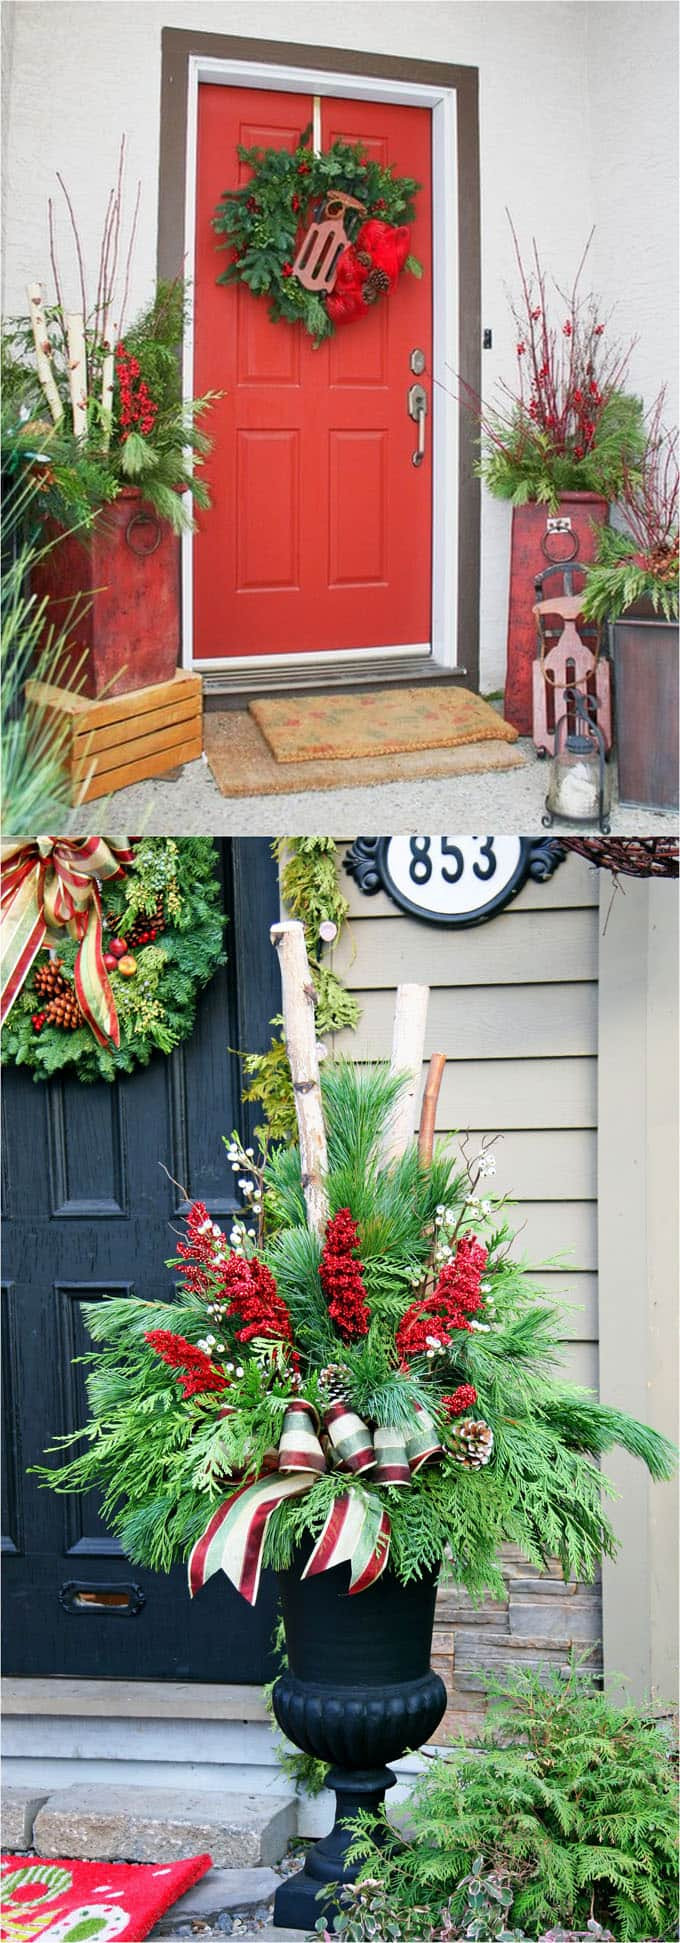 Outdoor Christmas Planters
 24 Colorful Winter Planters & Christmas Outdoor